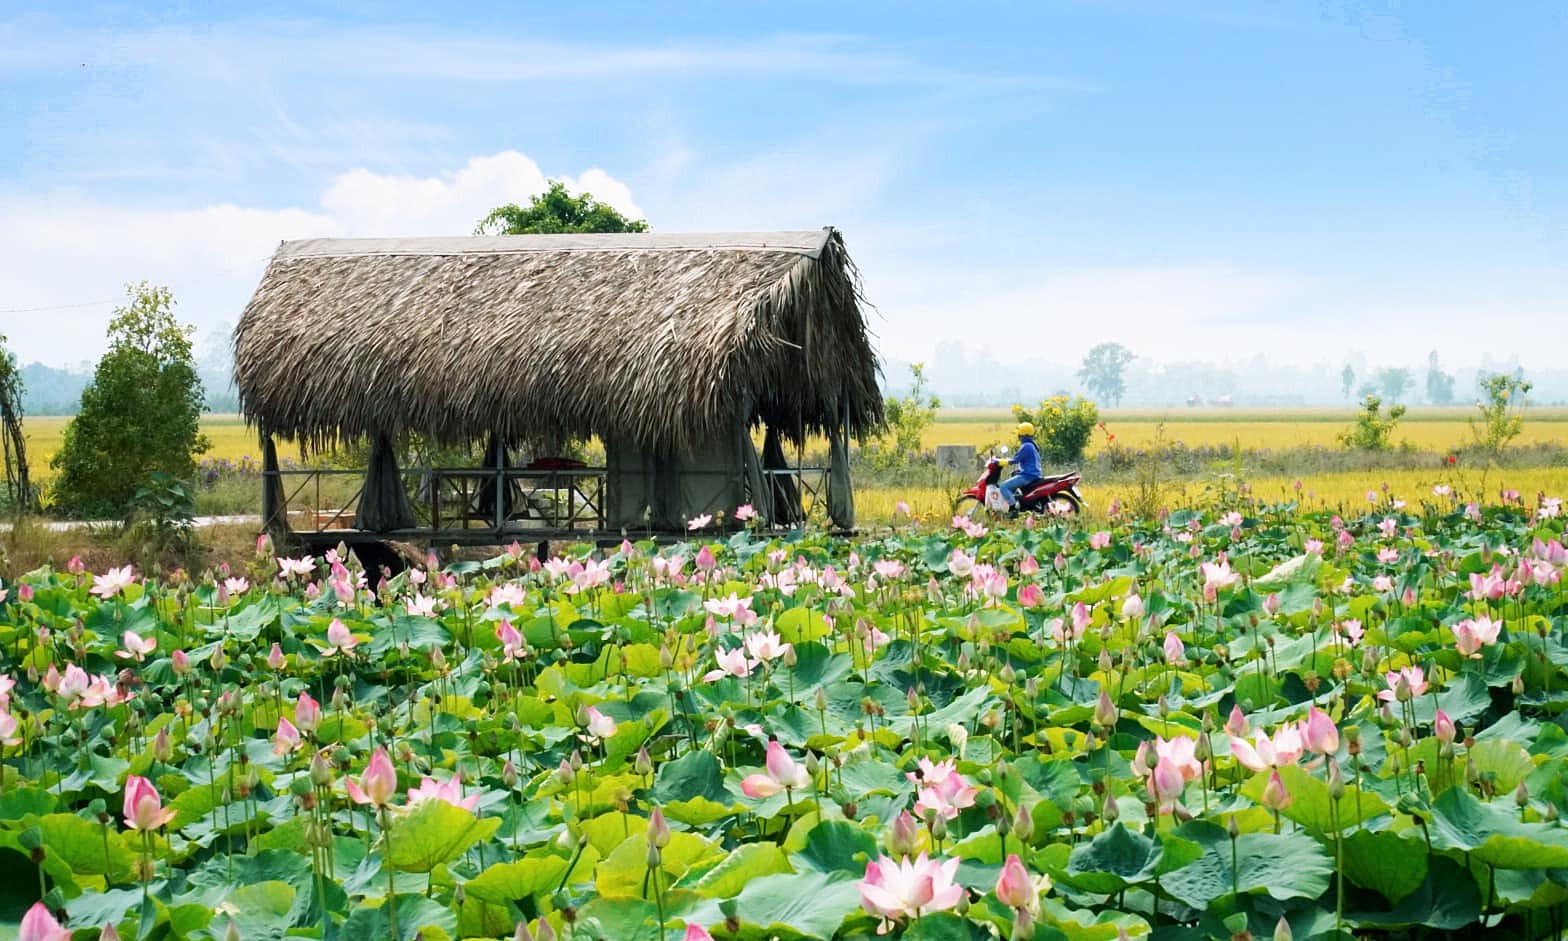 dong thap: land of bird sanctuary and everything lotus